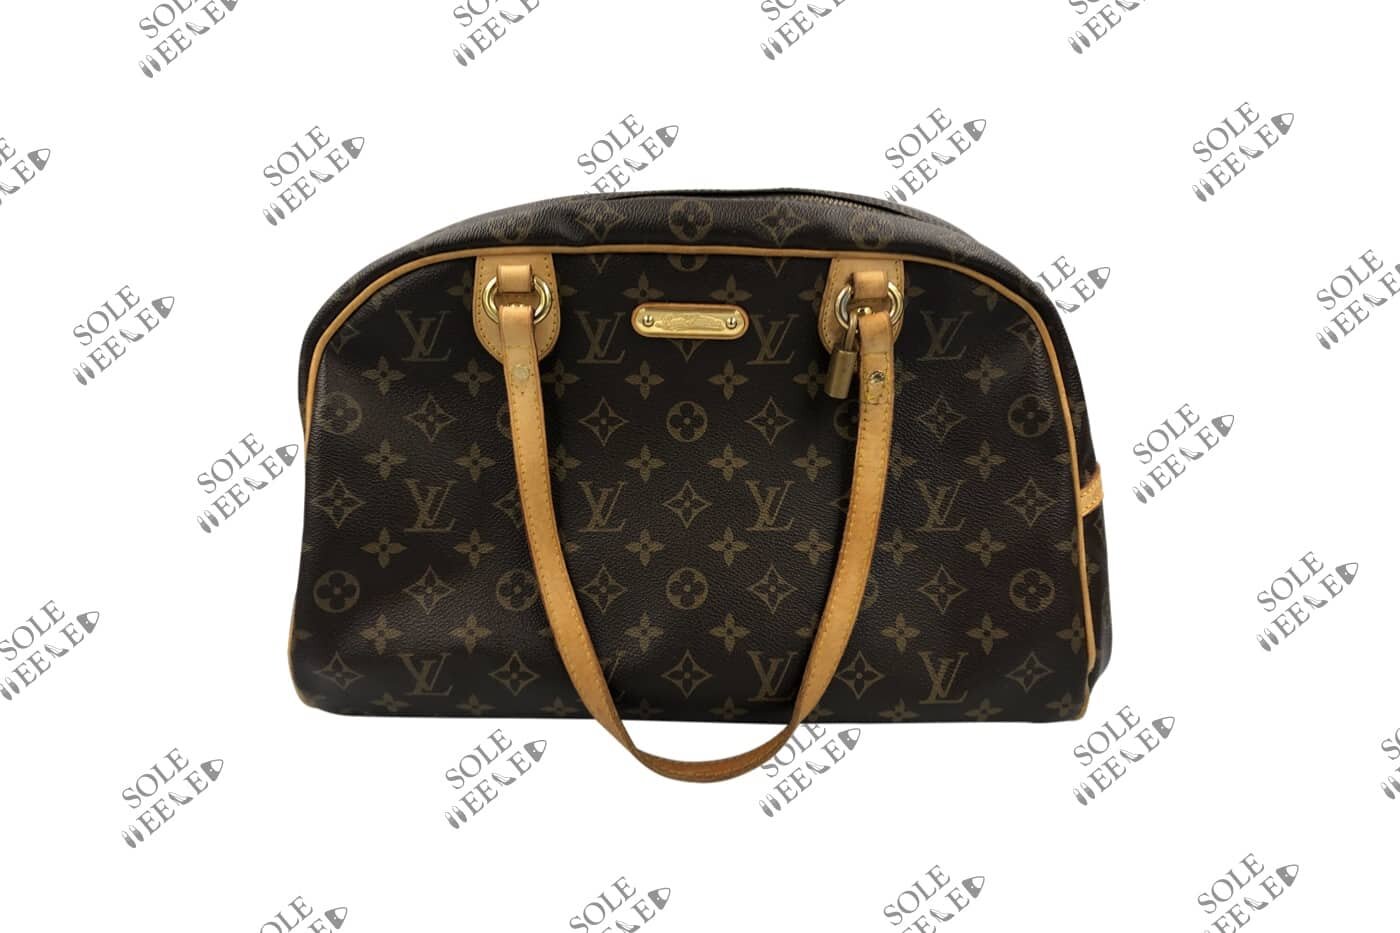 LOUIS VUITTON REPAIR UPDATE  COST, ISSUES, AND HOW LONG DID IT